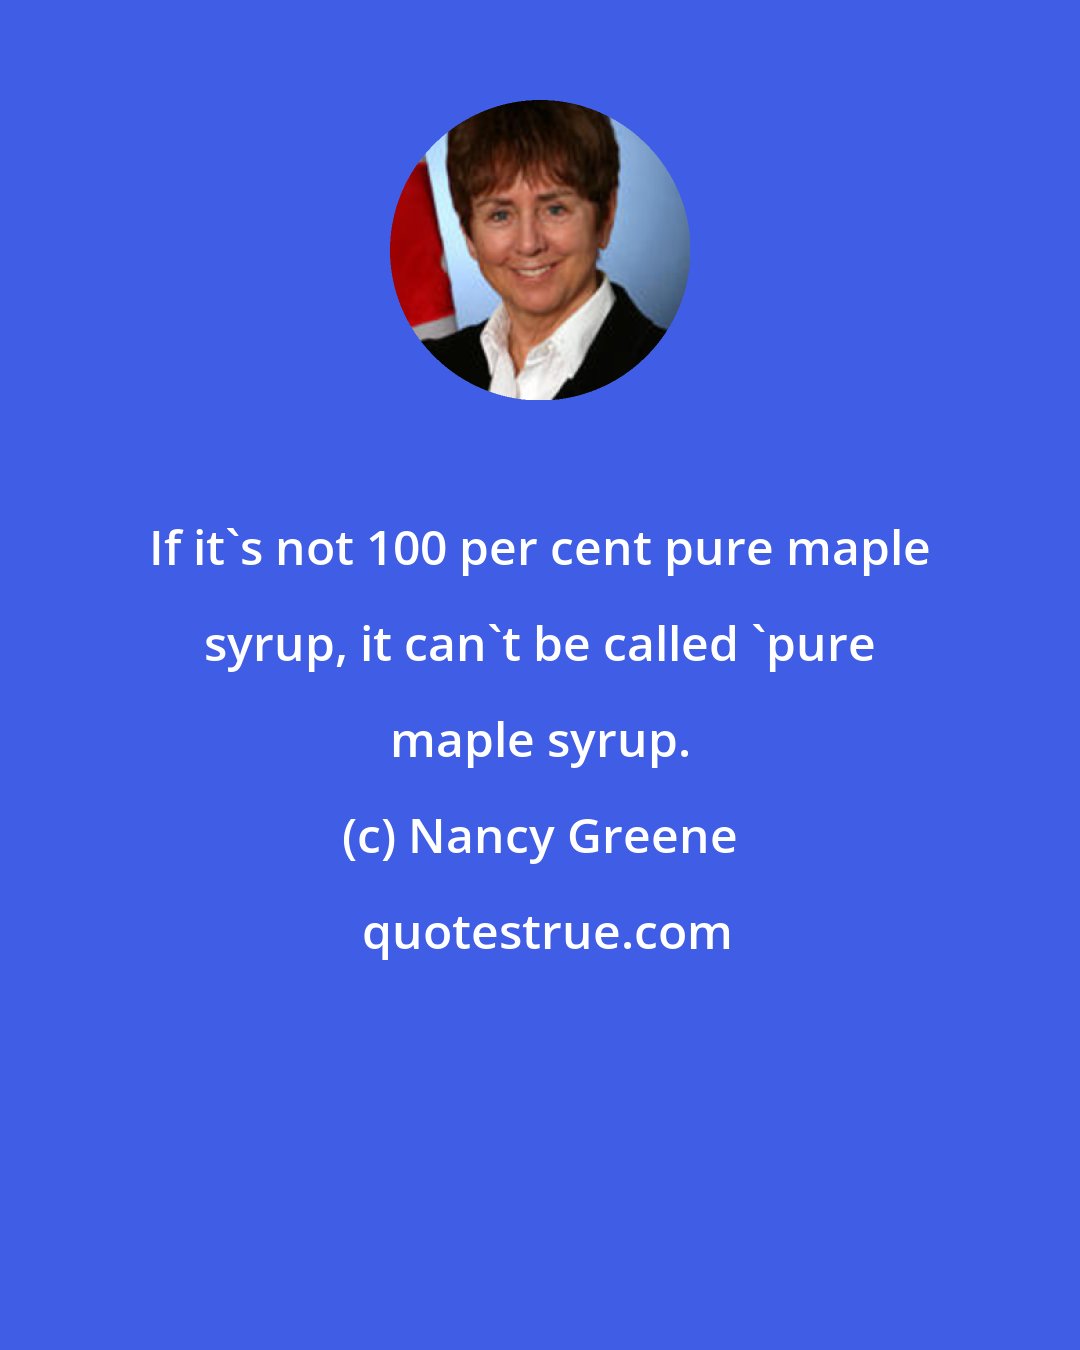 Nancy Greene: If it's not 100 per cent pure maple syrup, it can't be called 'pure maple syrup.